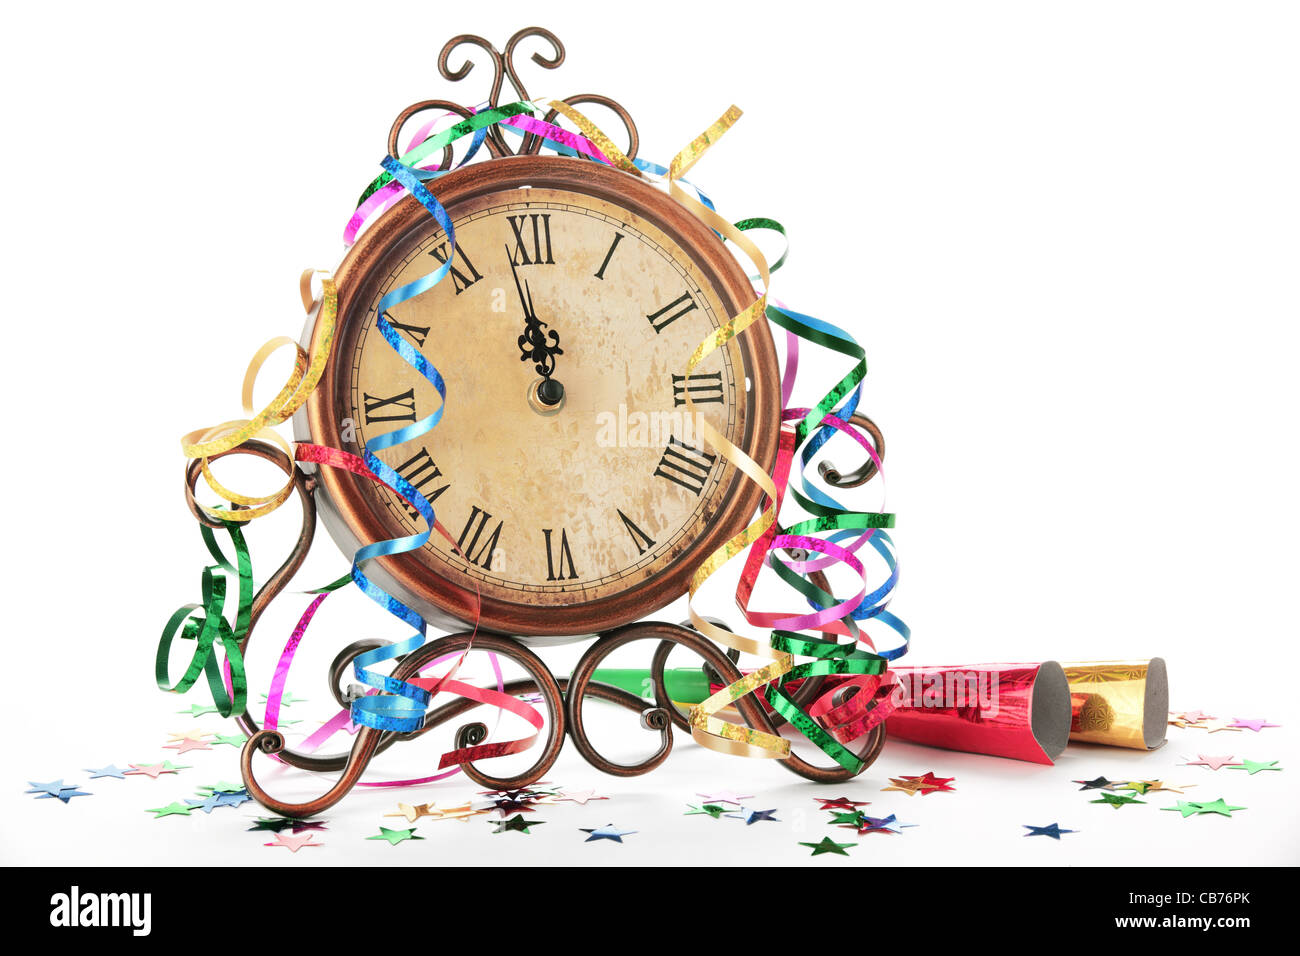 New year's party decoration Stock Photo